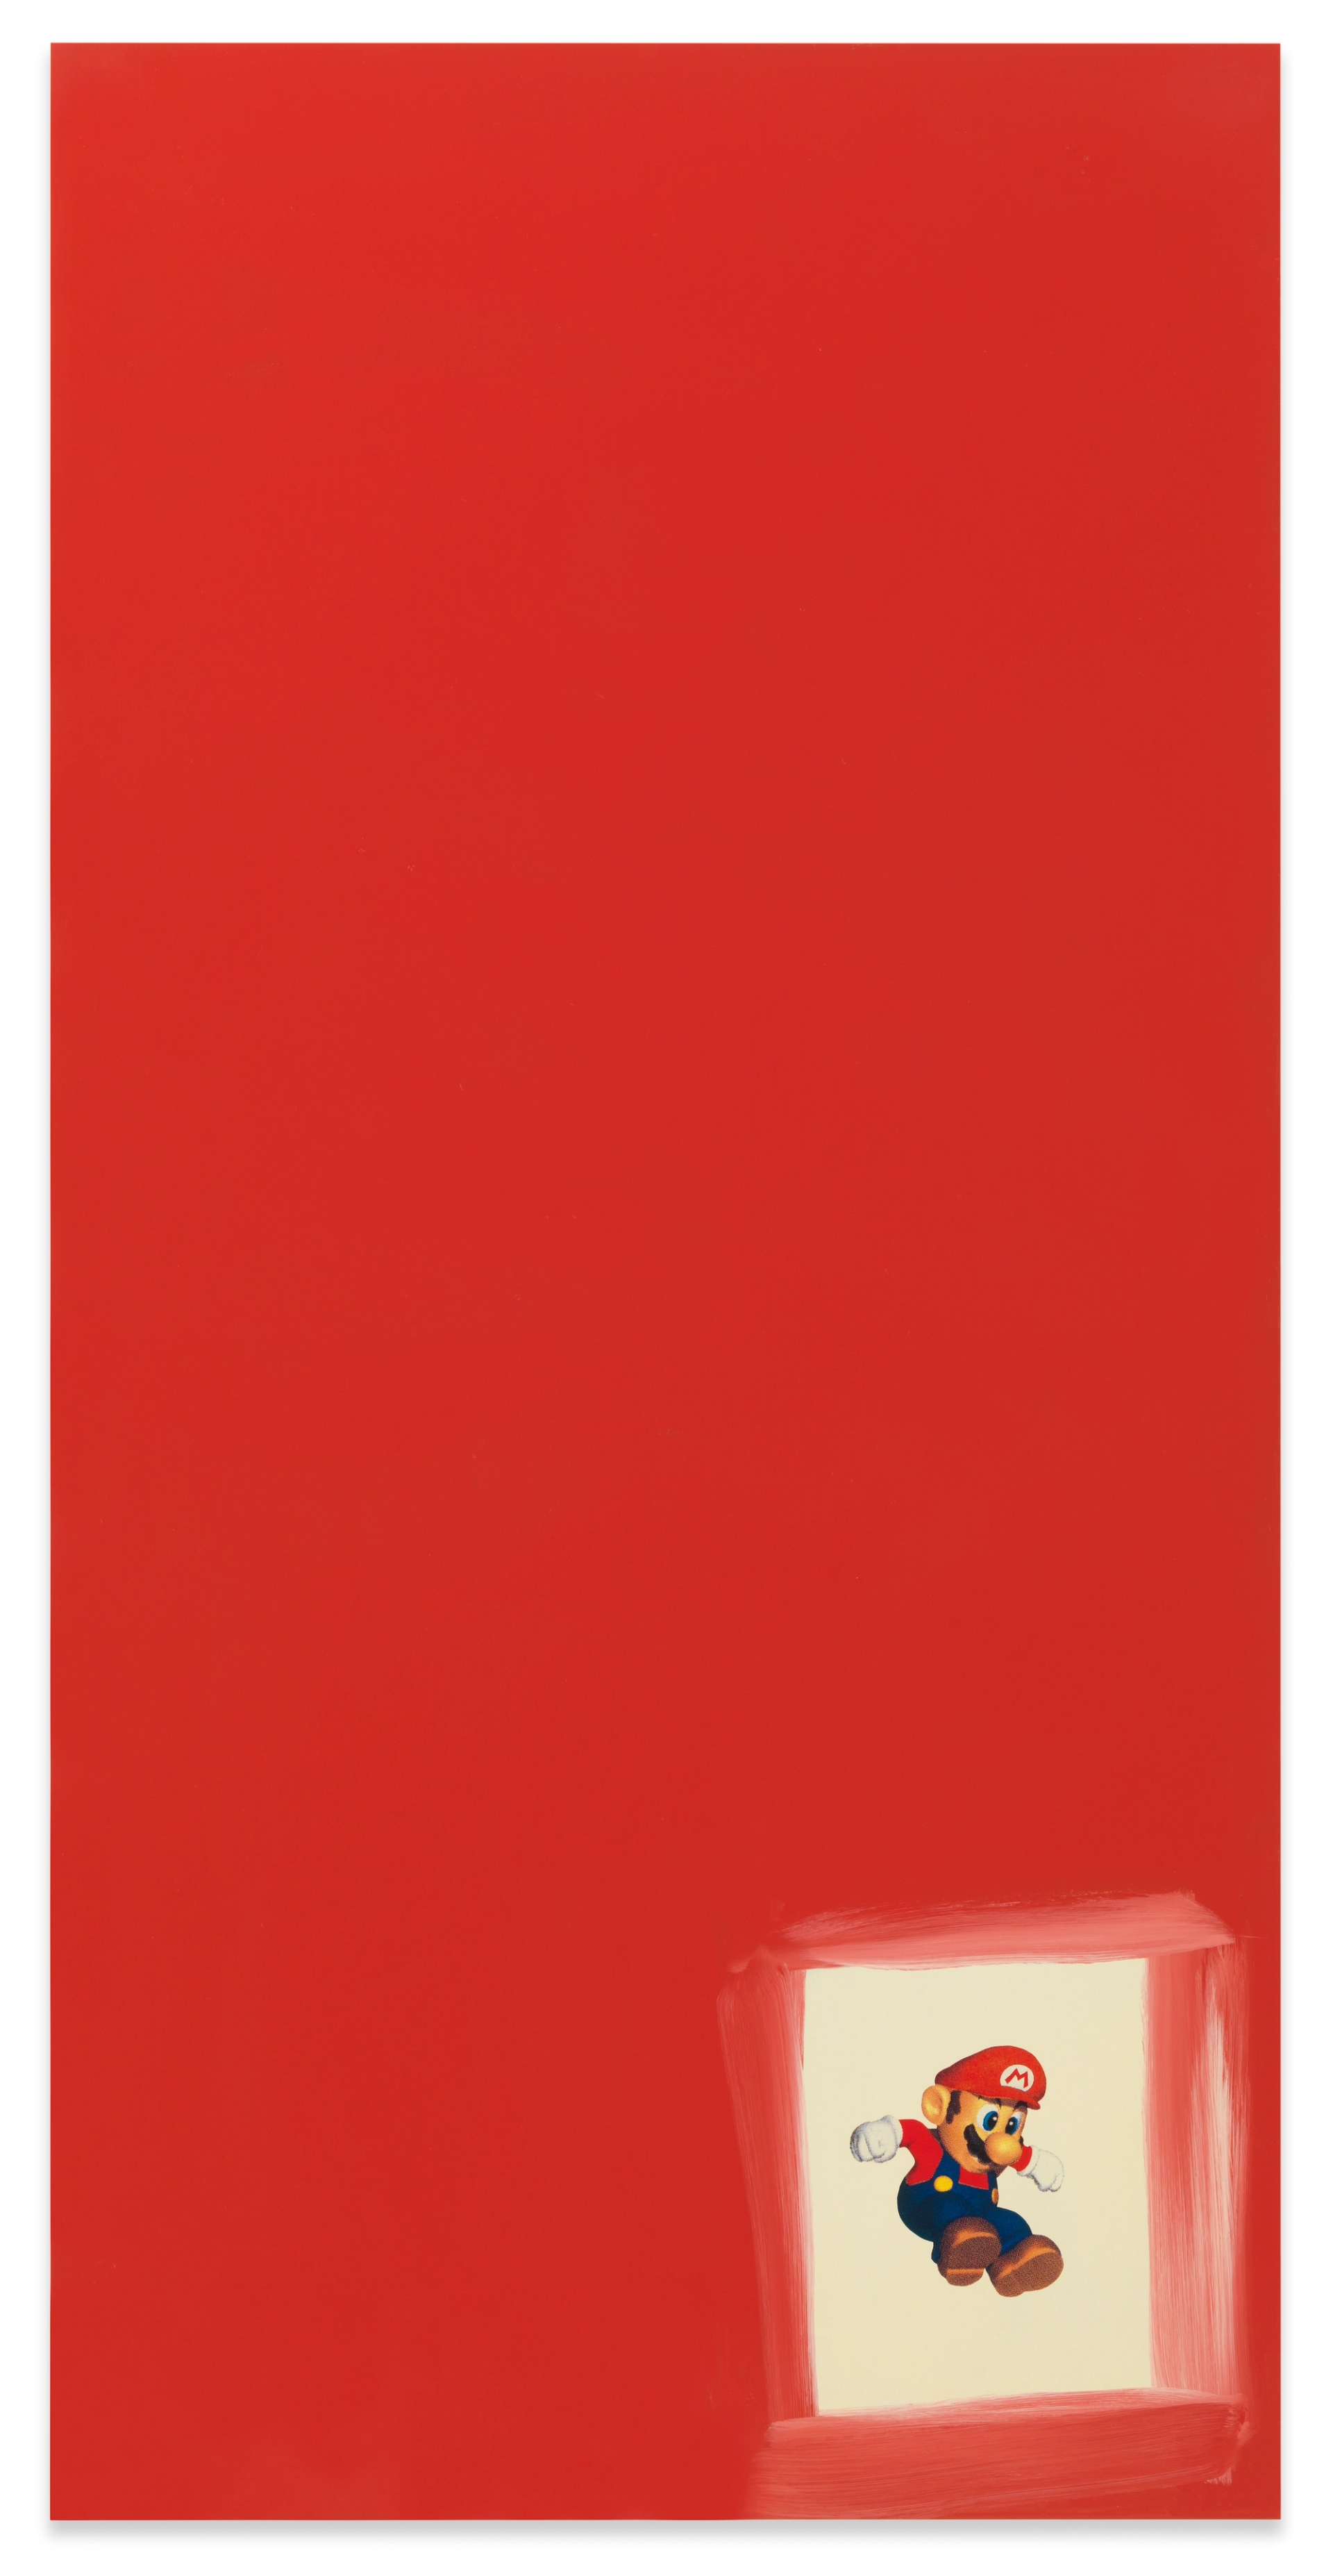 Michel Majerus, one part of five of Untitled, 1996, Enamel paint and silkscreen on aluminum, 98½ × 49¼ inches; 250 × 125 cm.